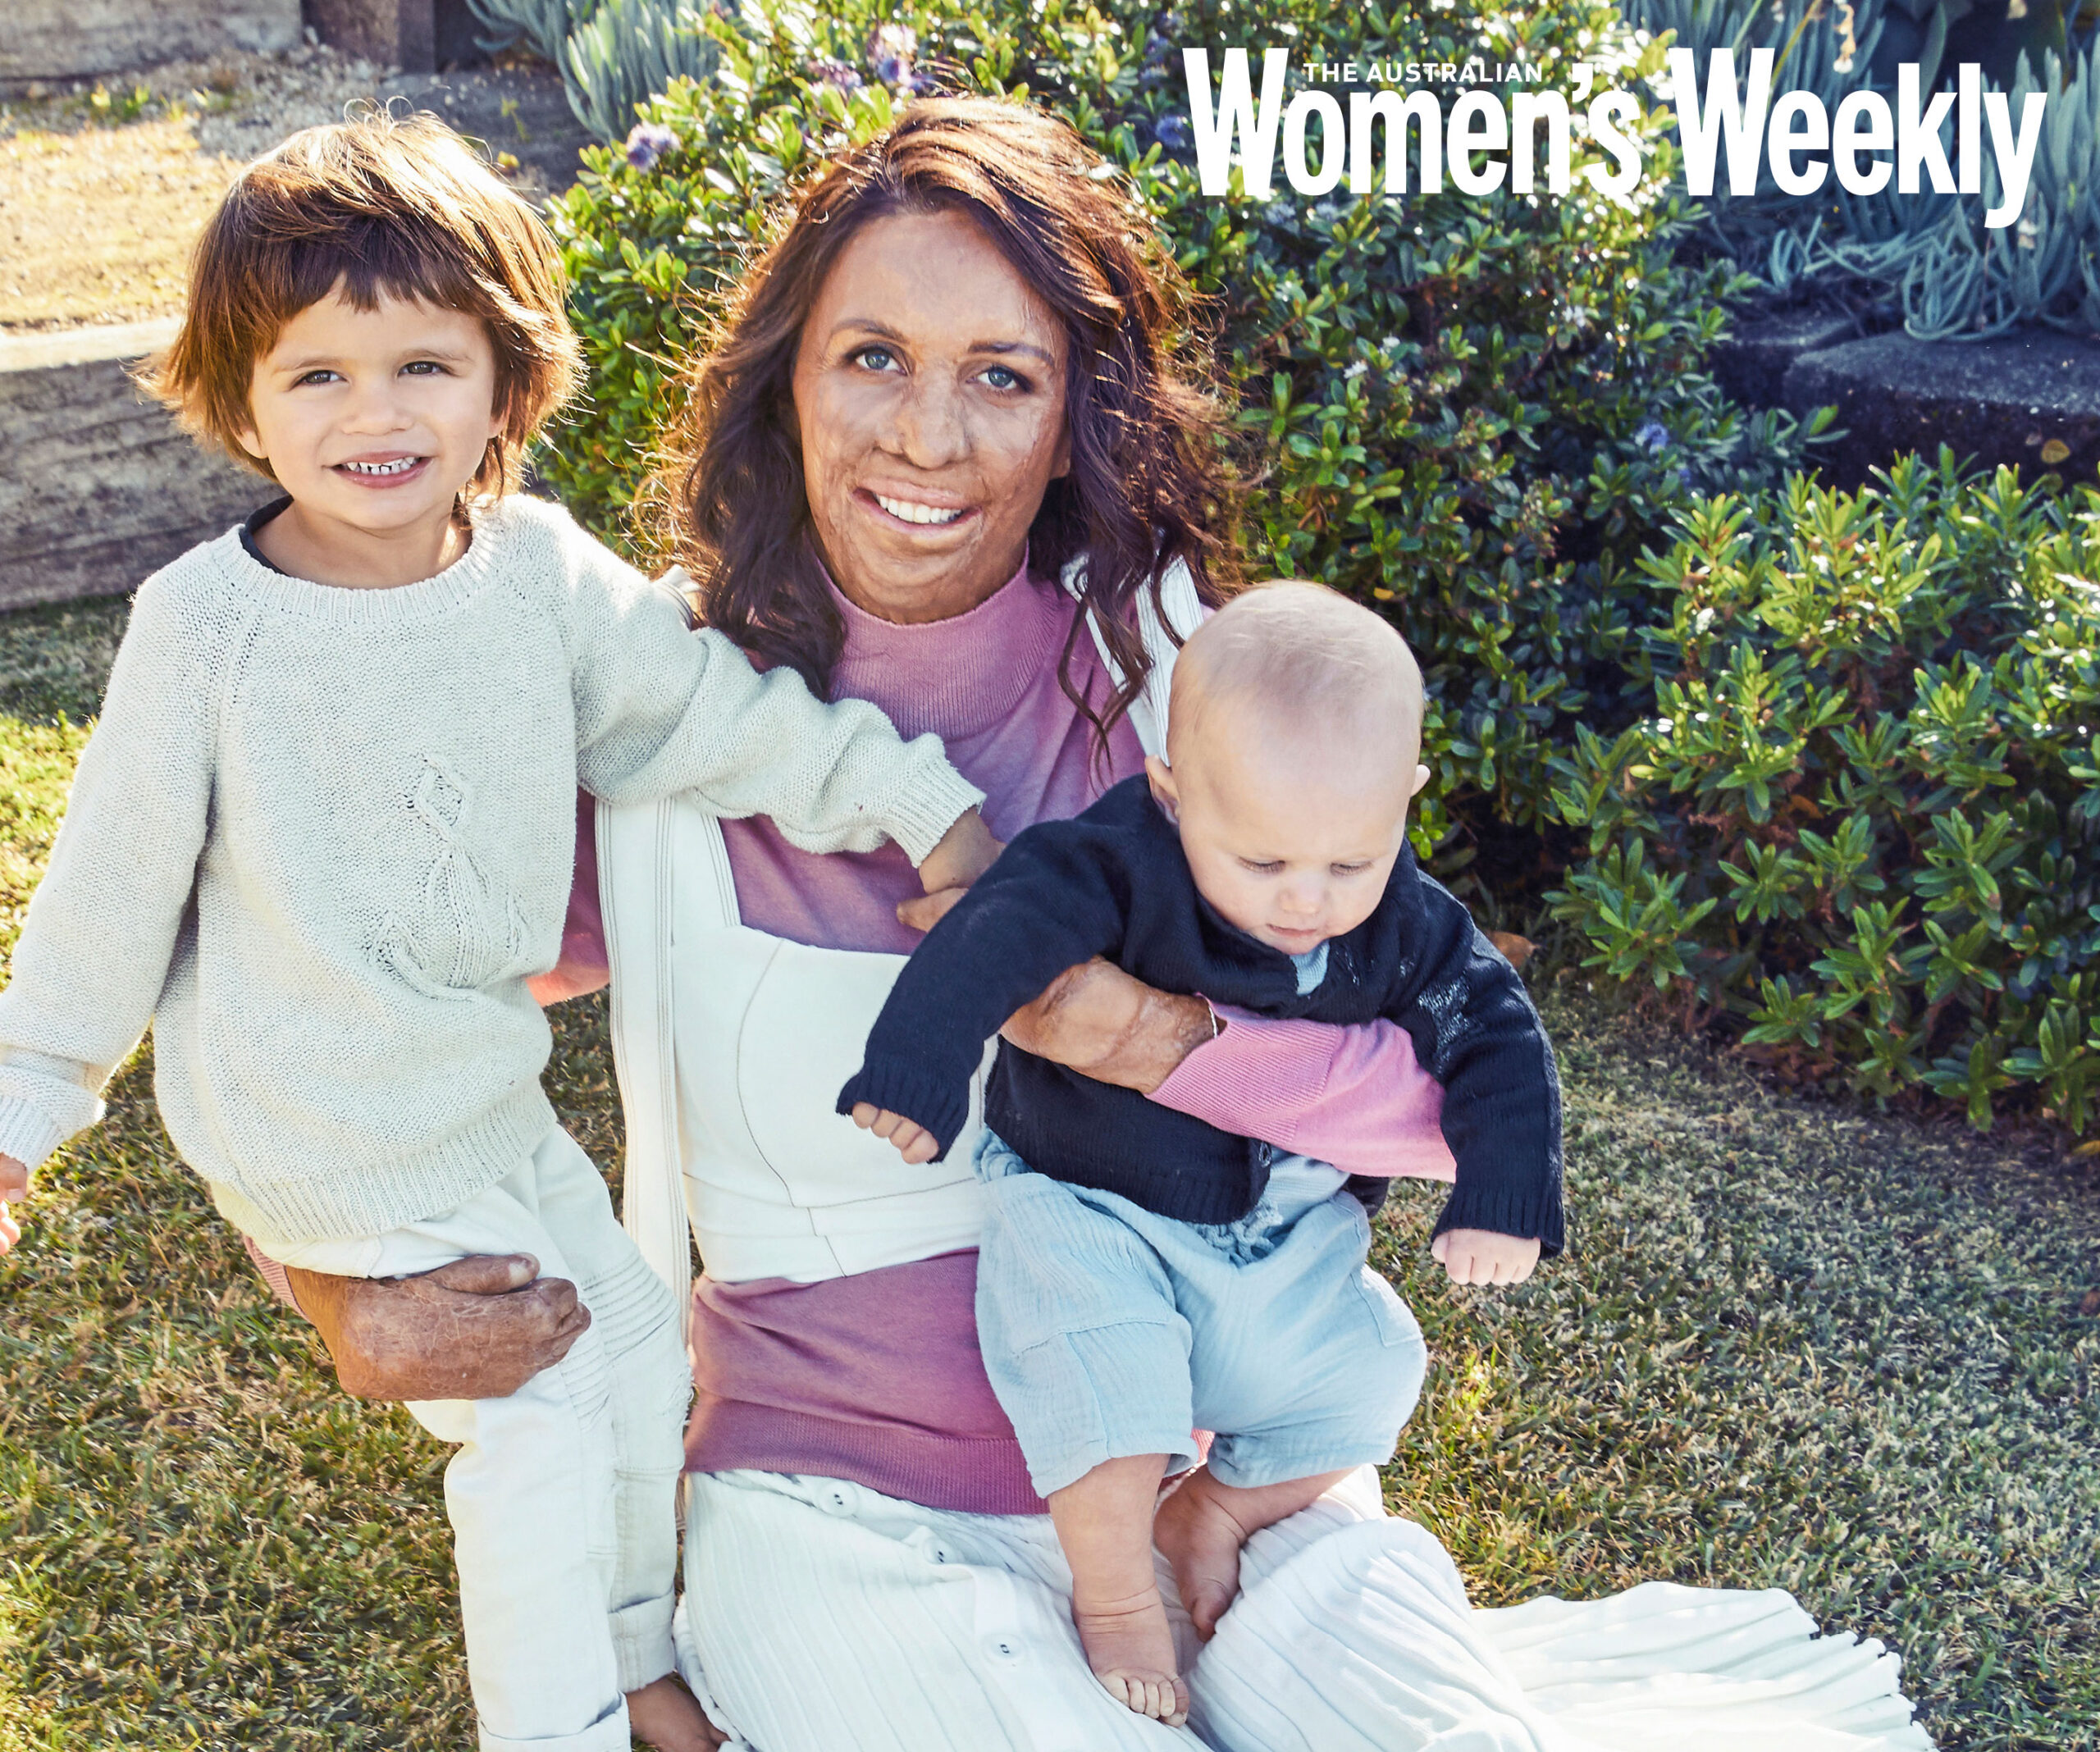 EXCLUSIVE: “There were recurring nightmares about running through flames with my son in my arms”: Turia Pitt on the terrifying reality of the 2020 bushfires